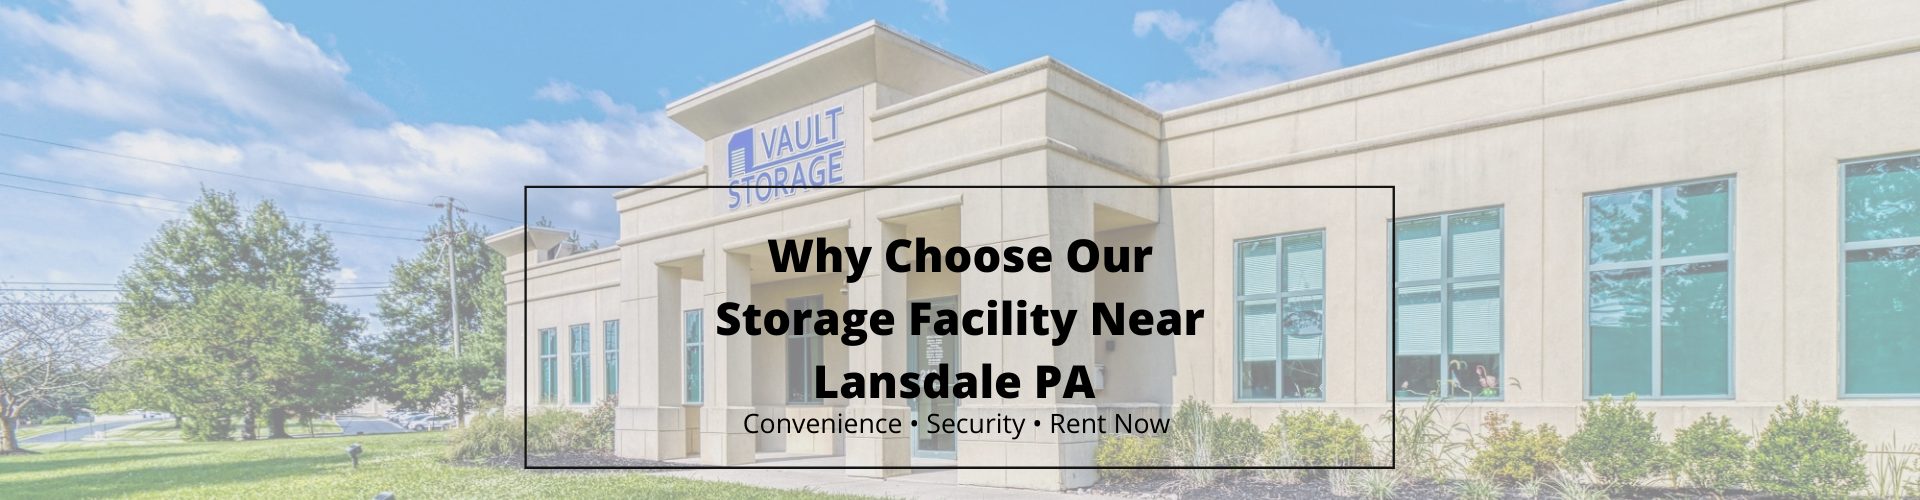 Our Storage Facility Near Lansdale PA